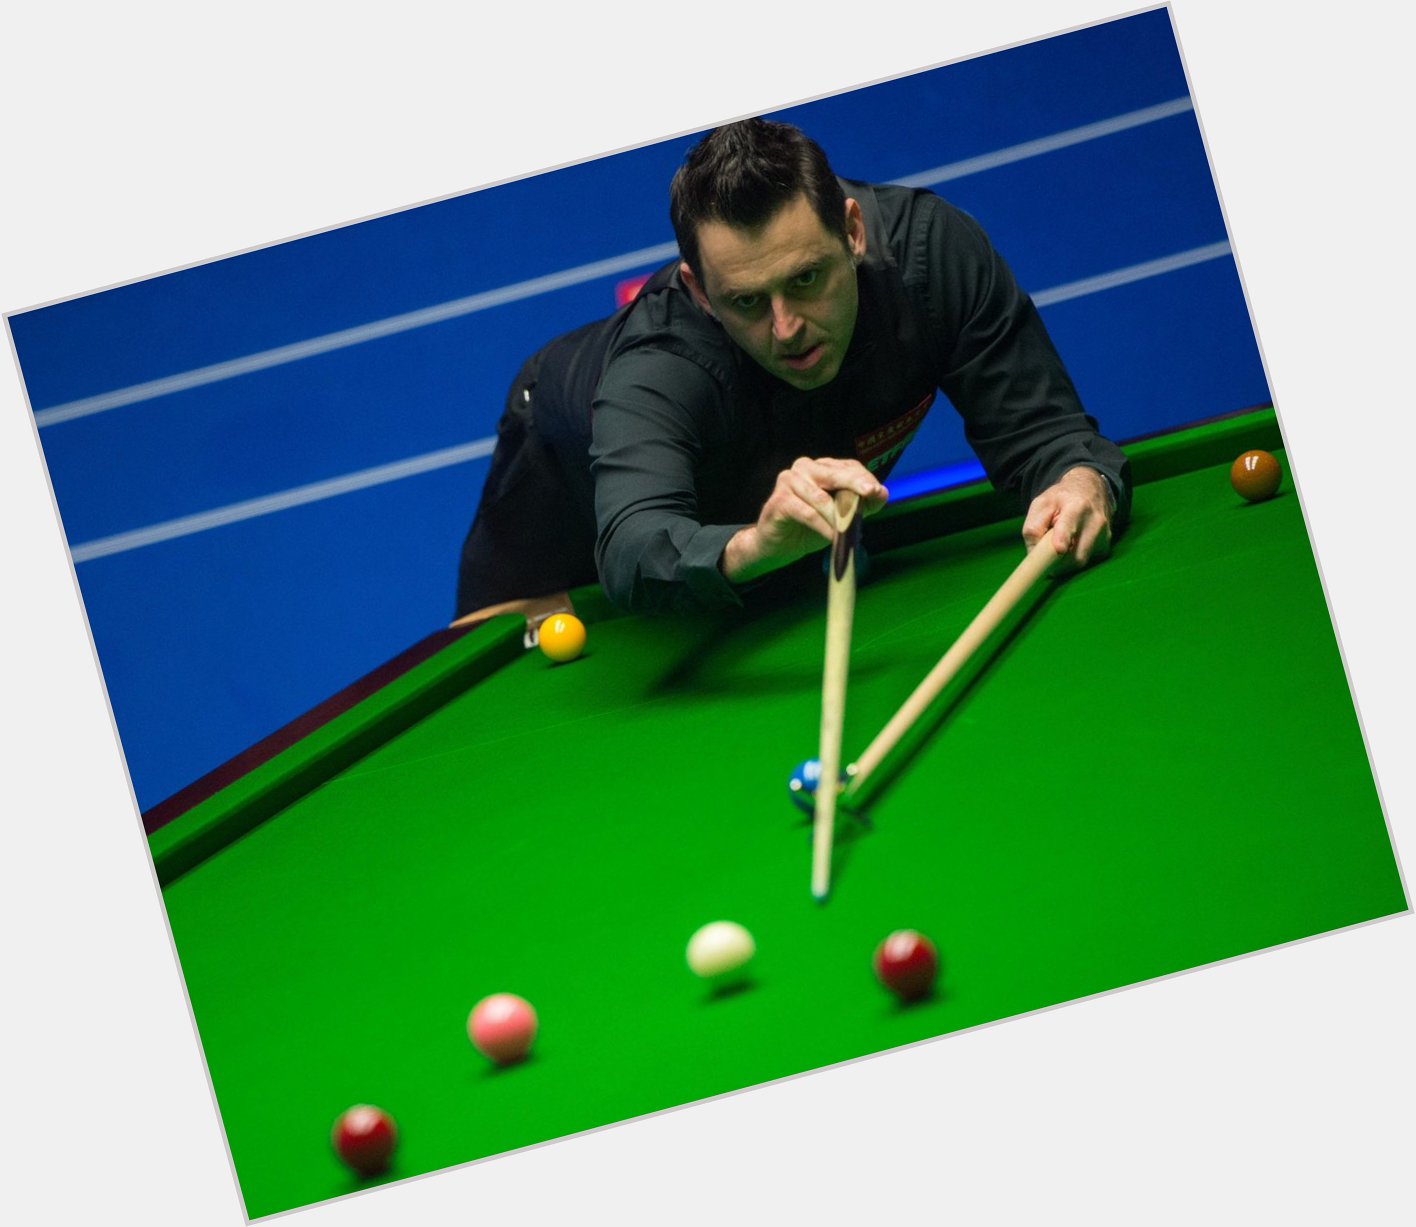 Ronnie O\sullivan Won 6-1 today topping off his 42nd birthday in the  Happy 42nd Birthday! 